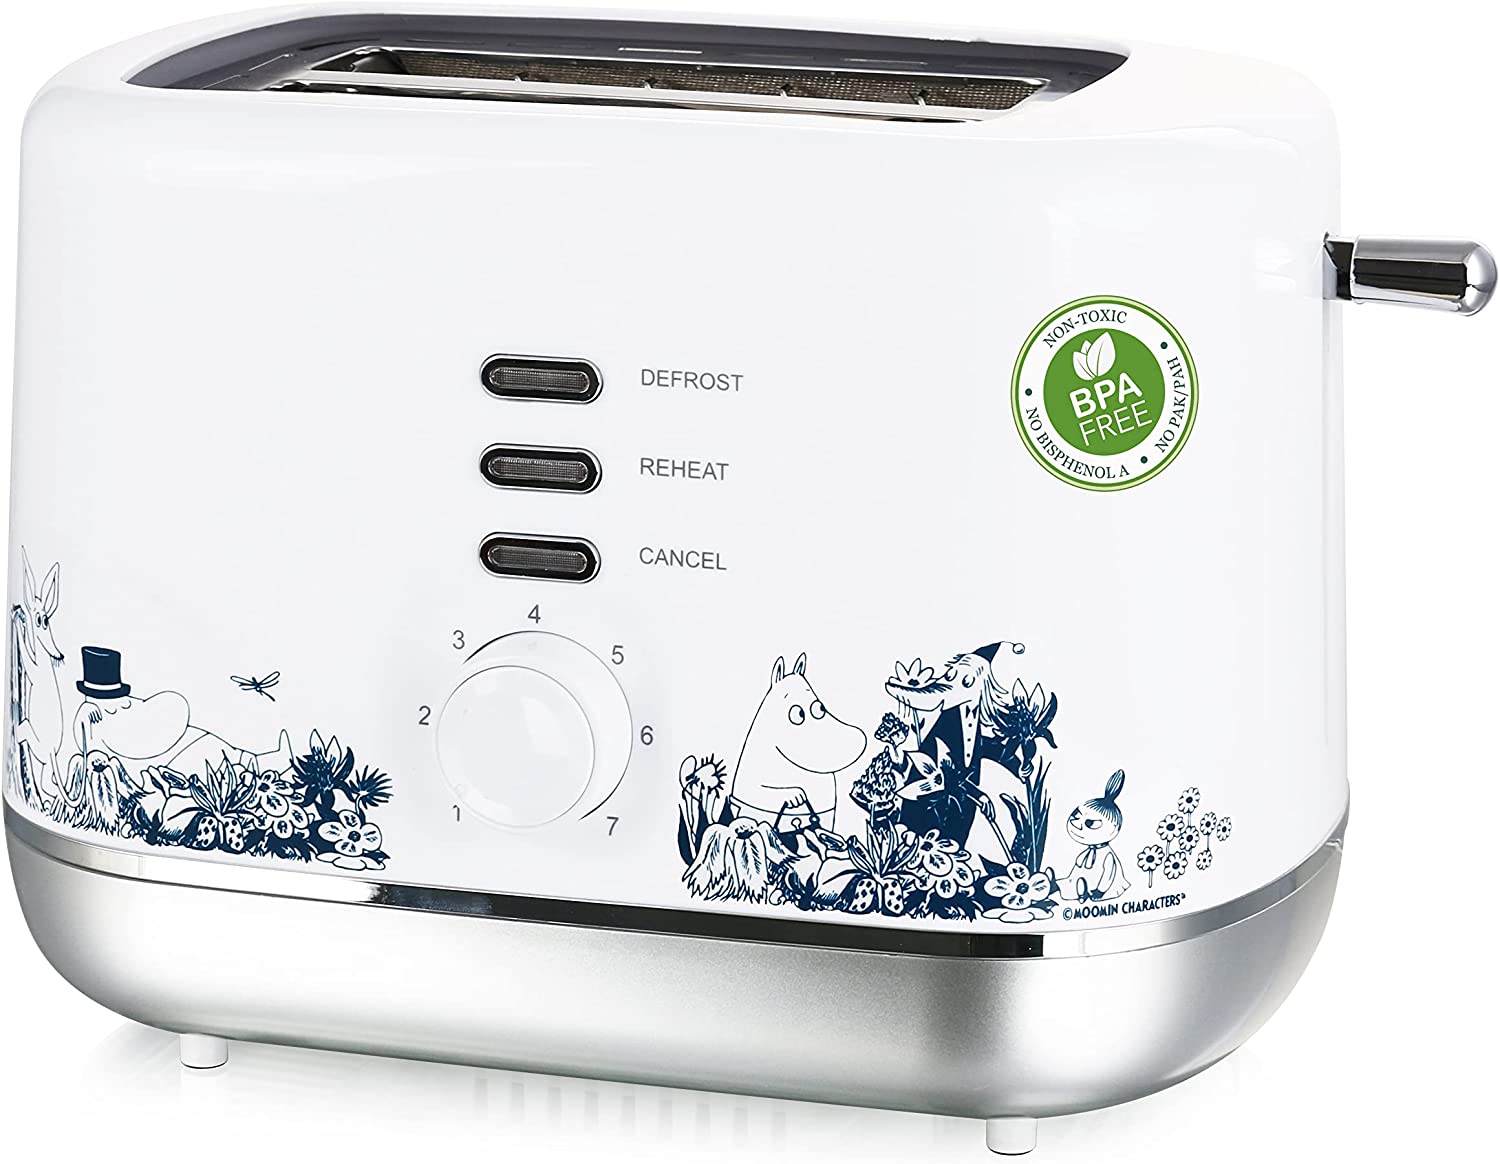 Moomin Toaster With 2 Extra Toast Slots and Centring Function, Removable Crumb Drawer, Demolition / Reheeat Buttons, 7 Adjustable Browning Levels, 850 W, BPA Free